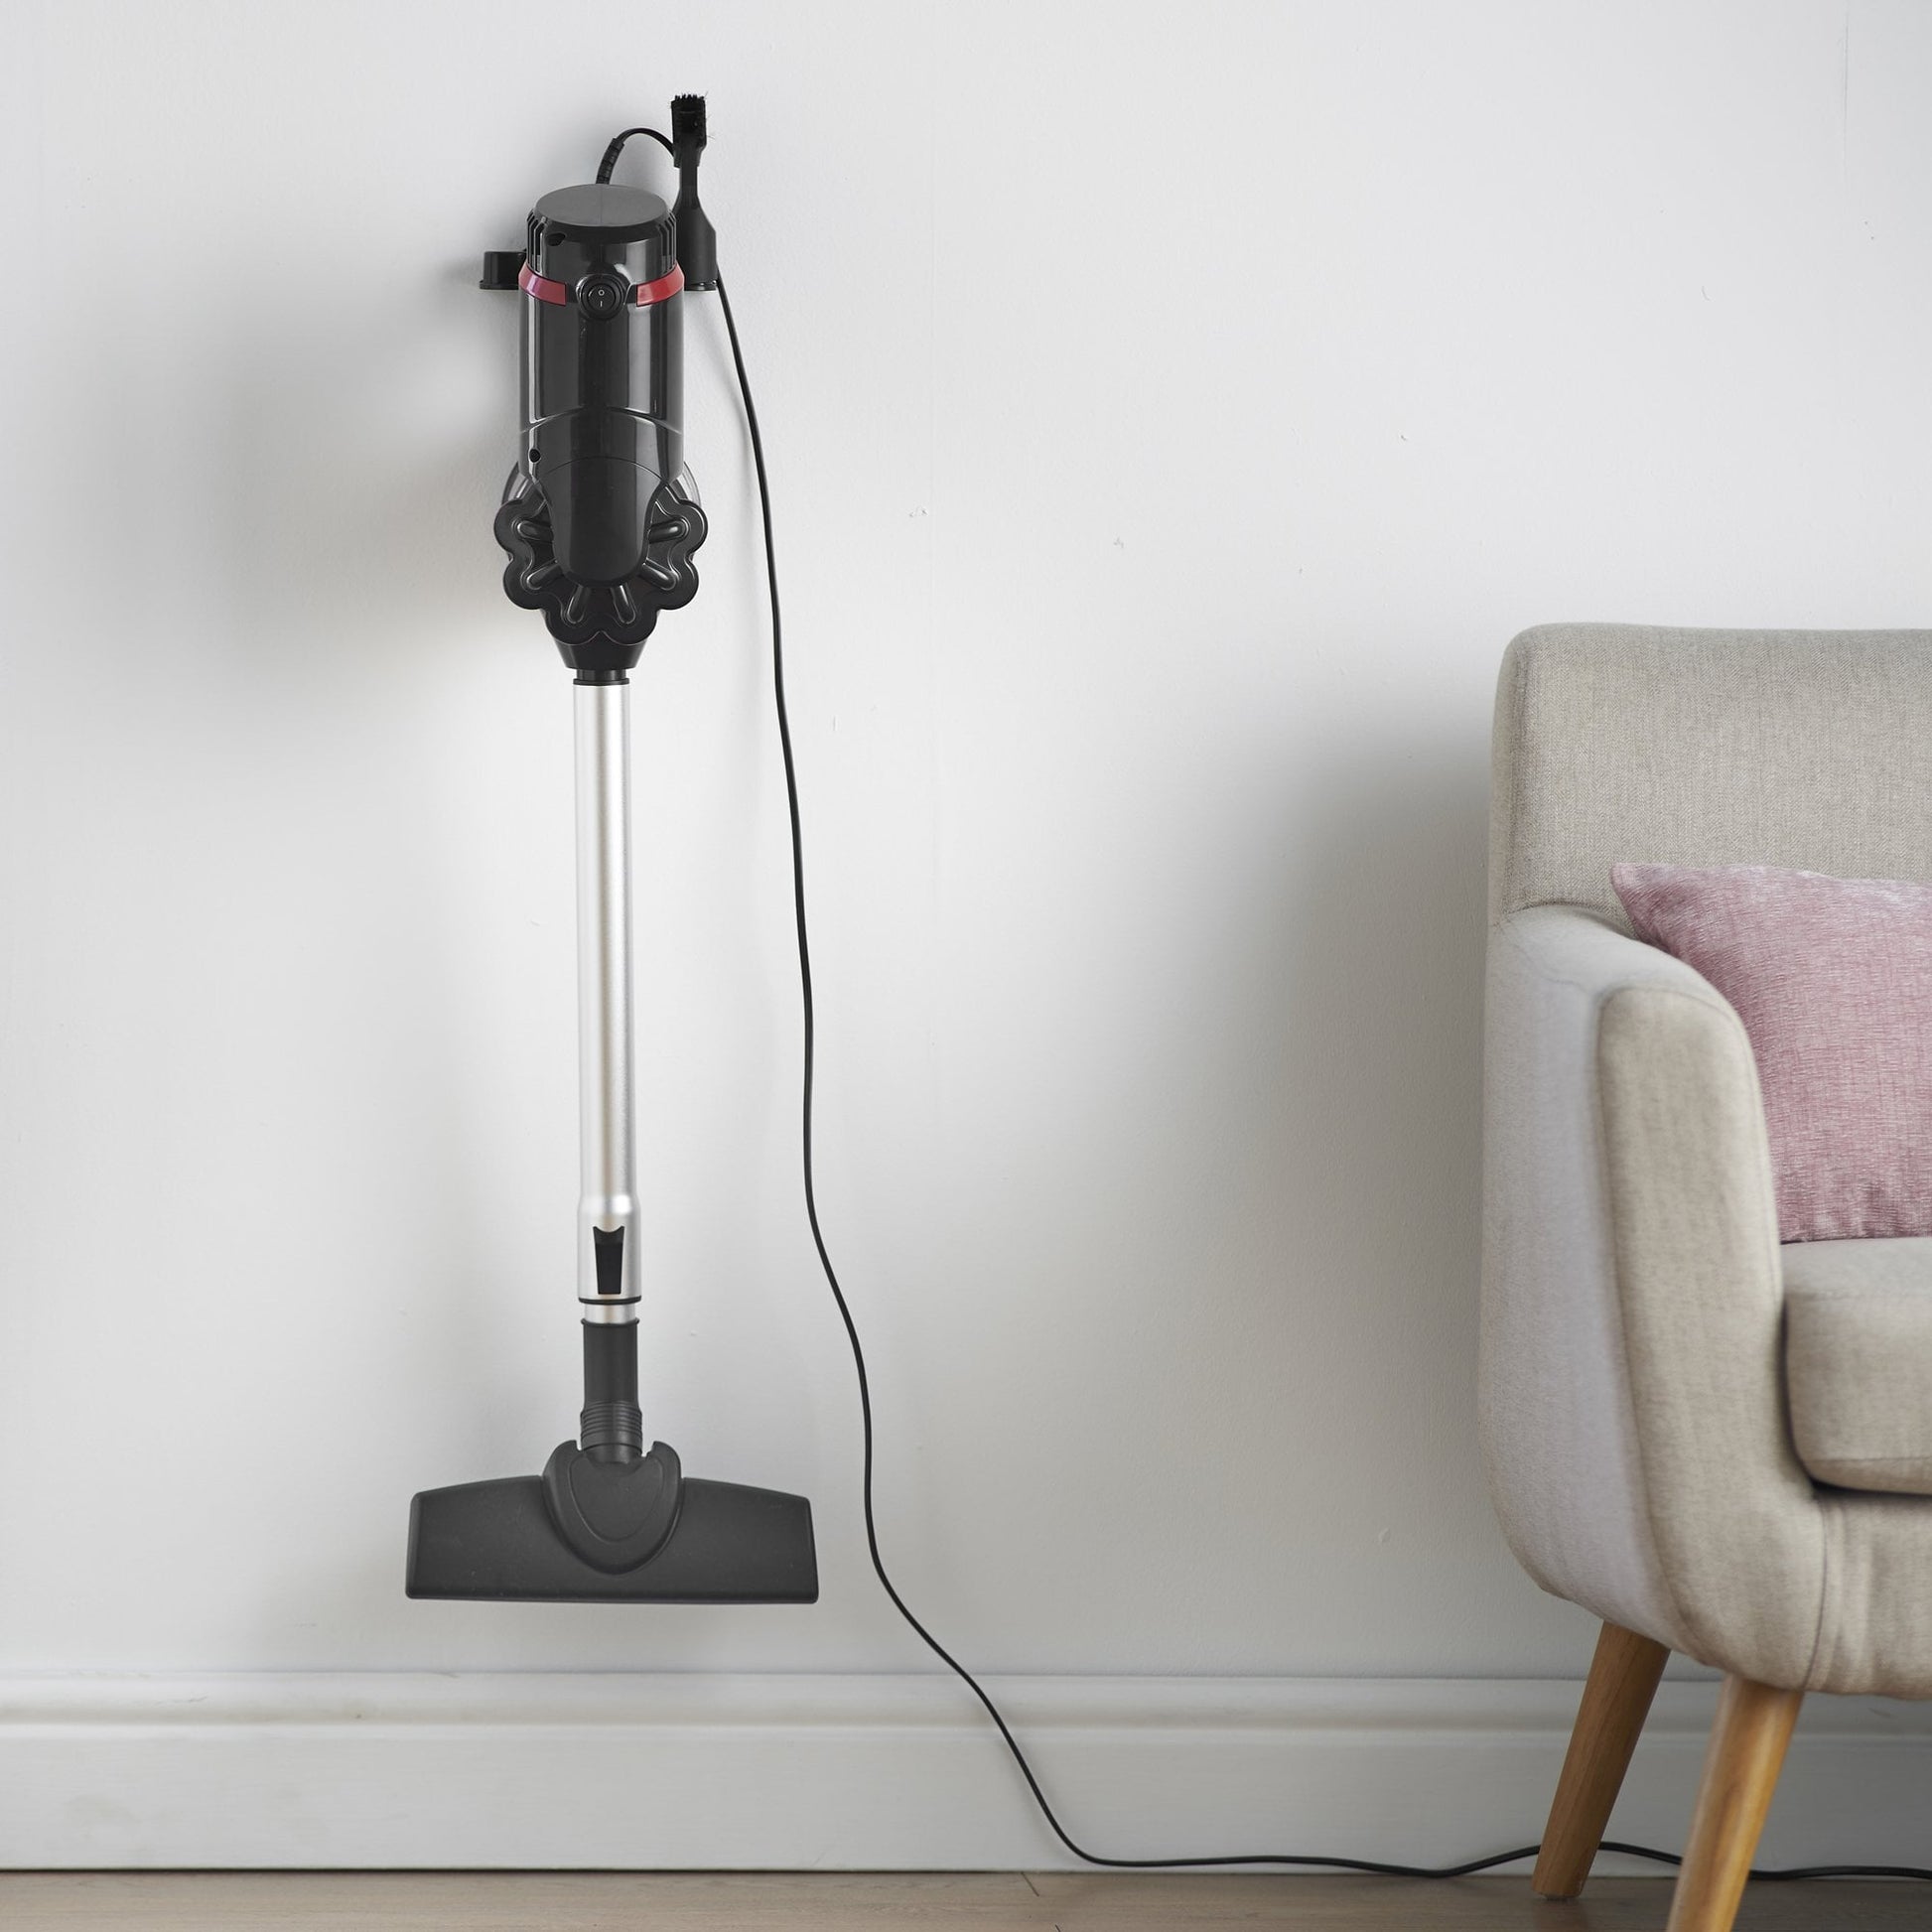 Lewis's 600W 2-in-1 Upright Stick/Handheld Corded - Vacuum Cleaner